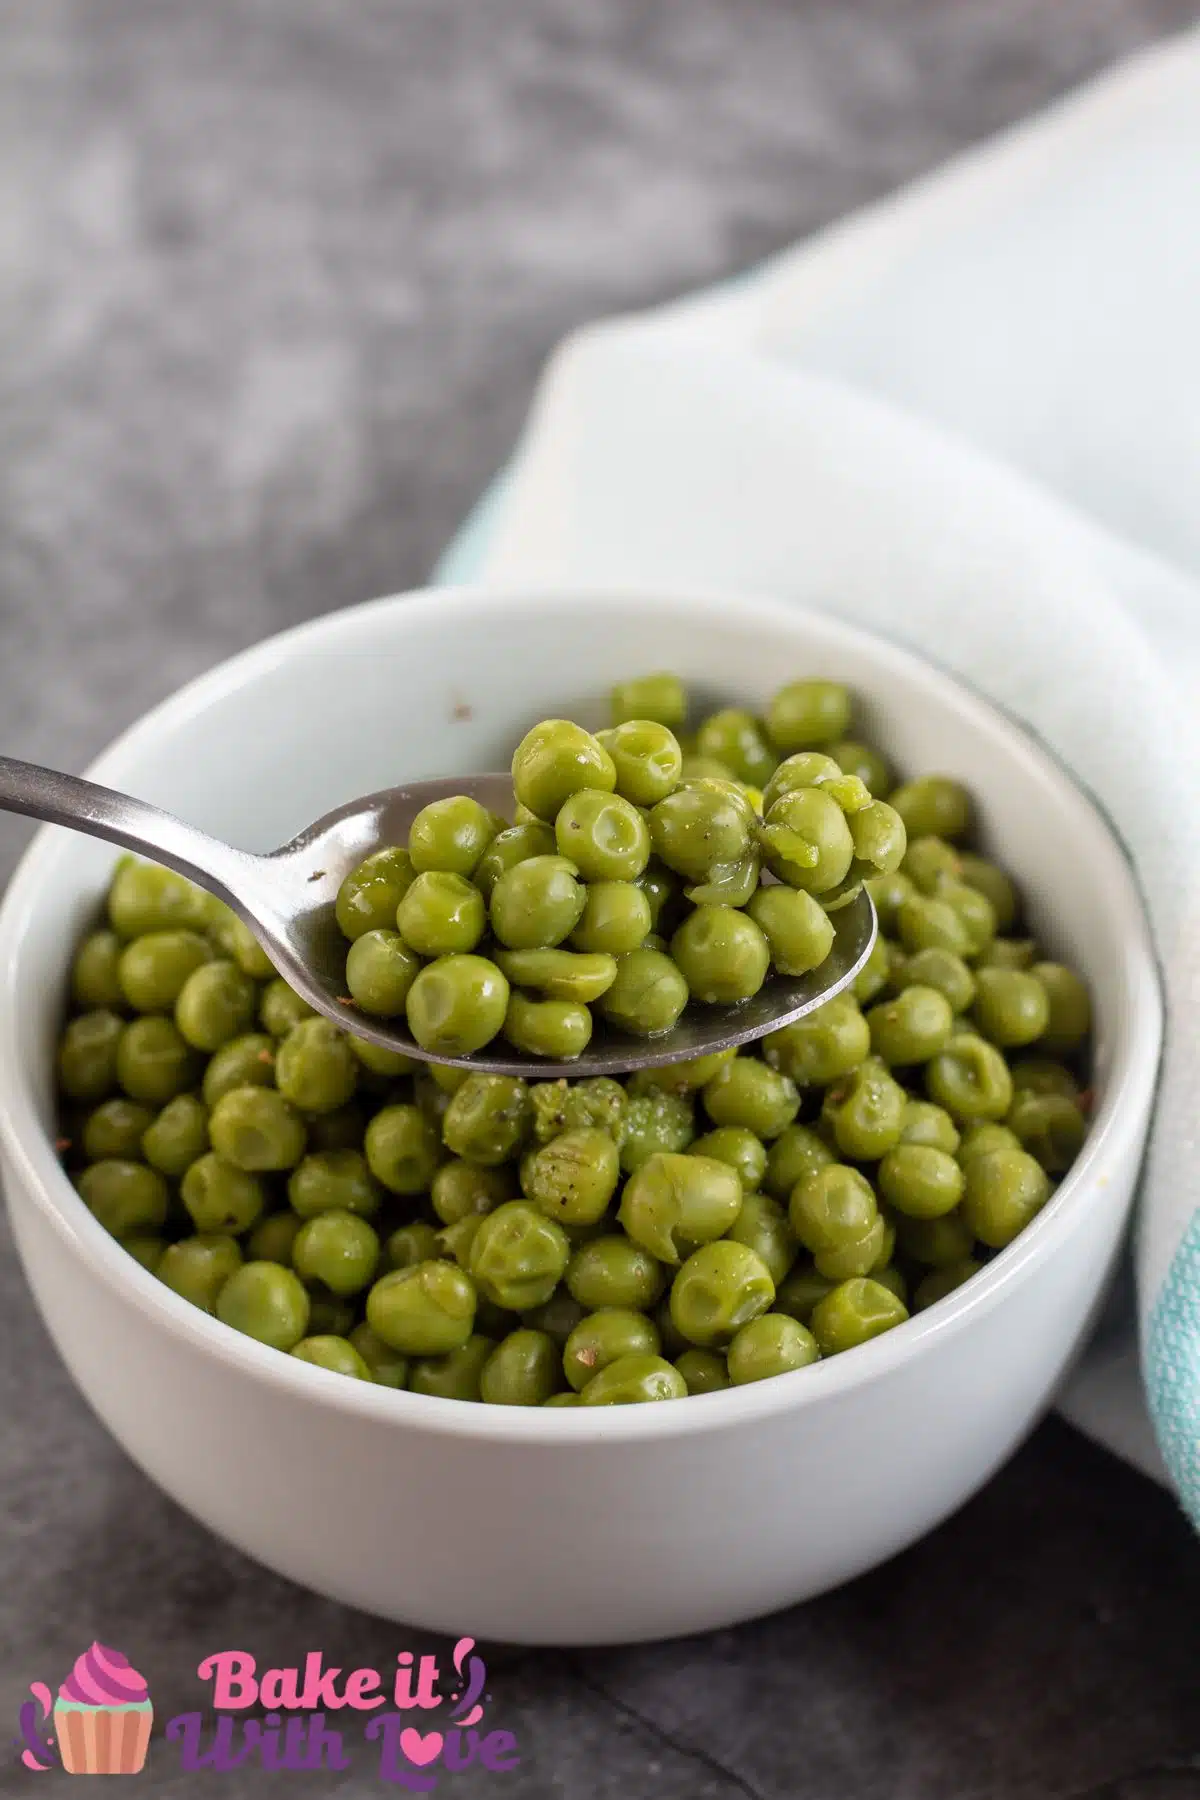 Tall image showing canned cooked peas in a small white bowl.